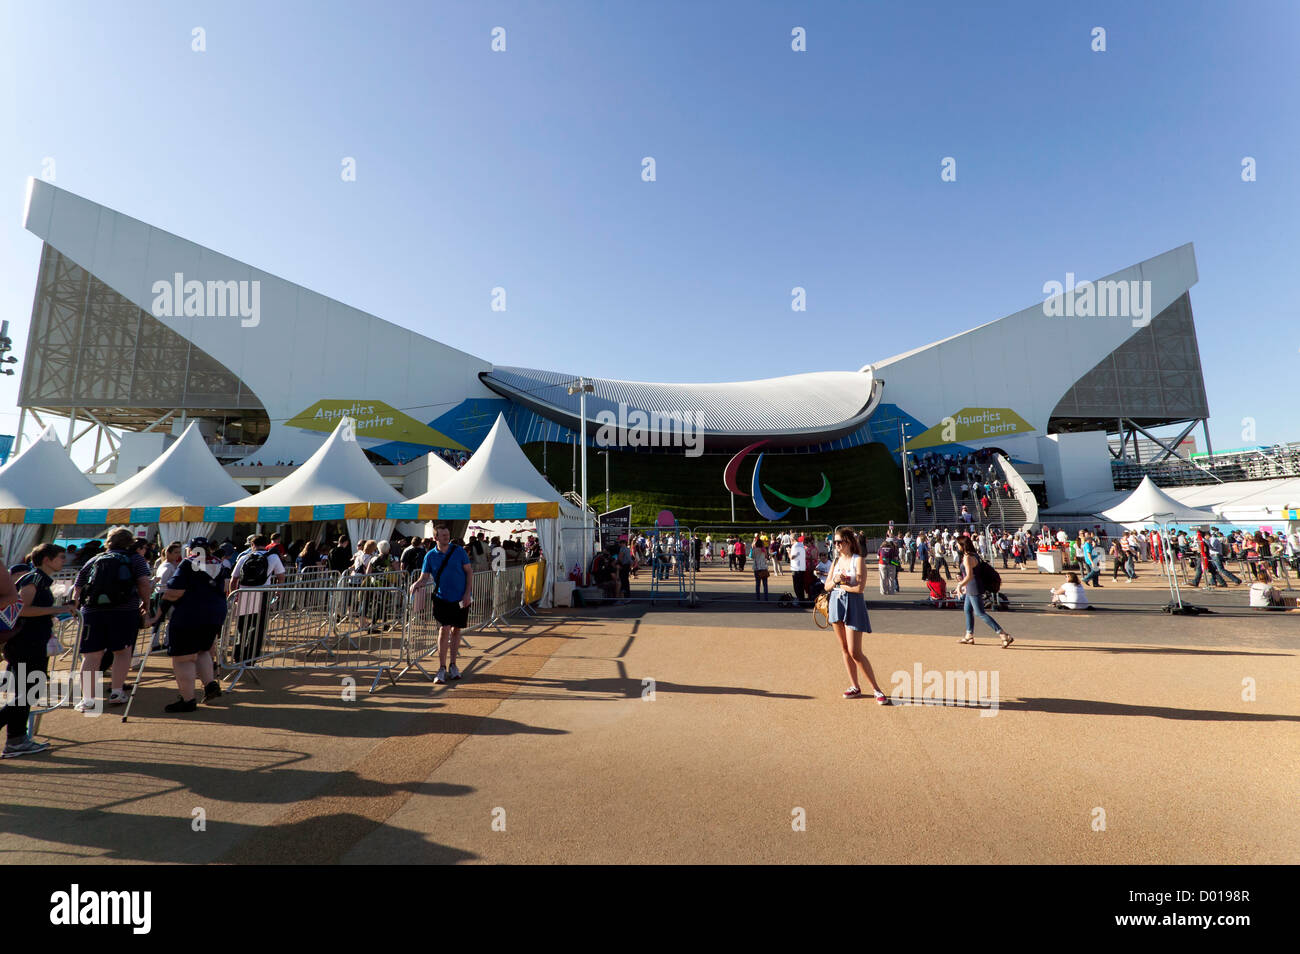 Wide-angle view of the Aquatics centre, at the Olympic Park, Stratford. Stock Photo